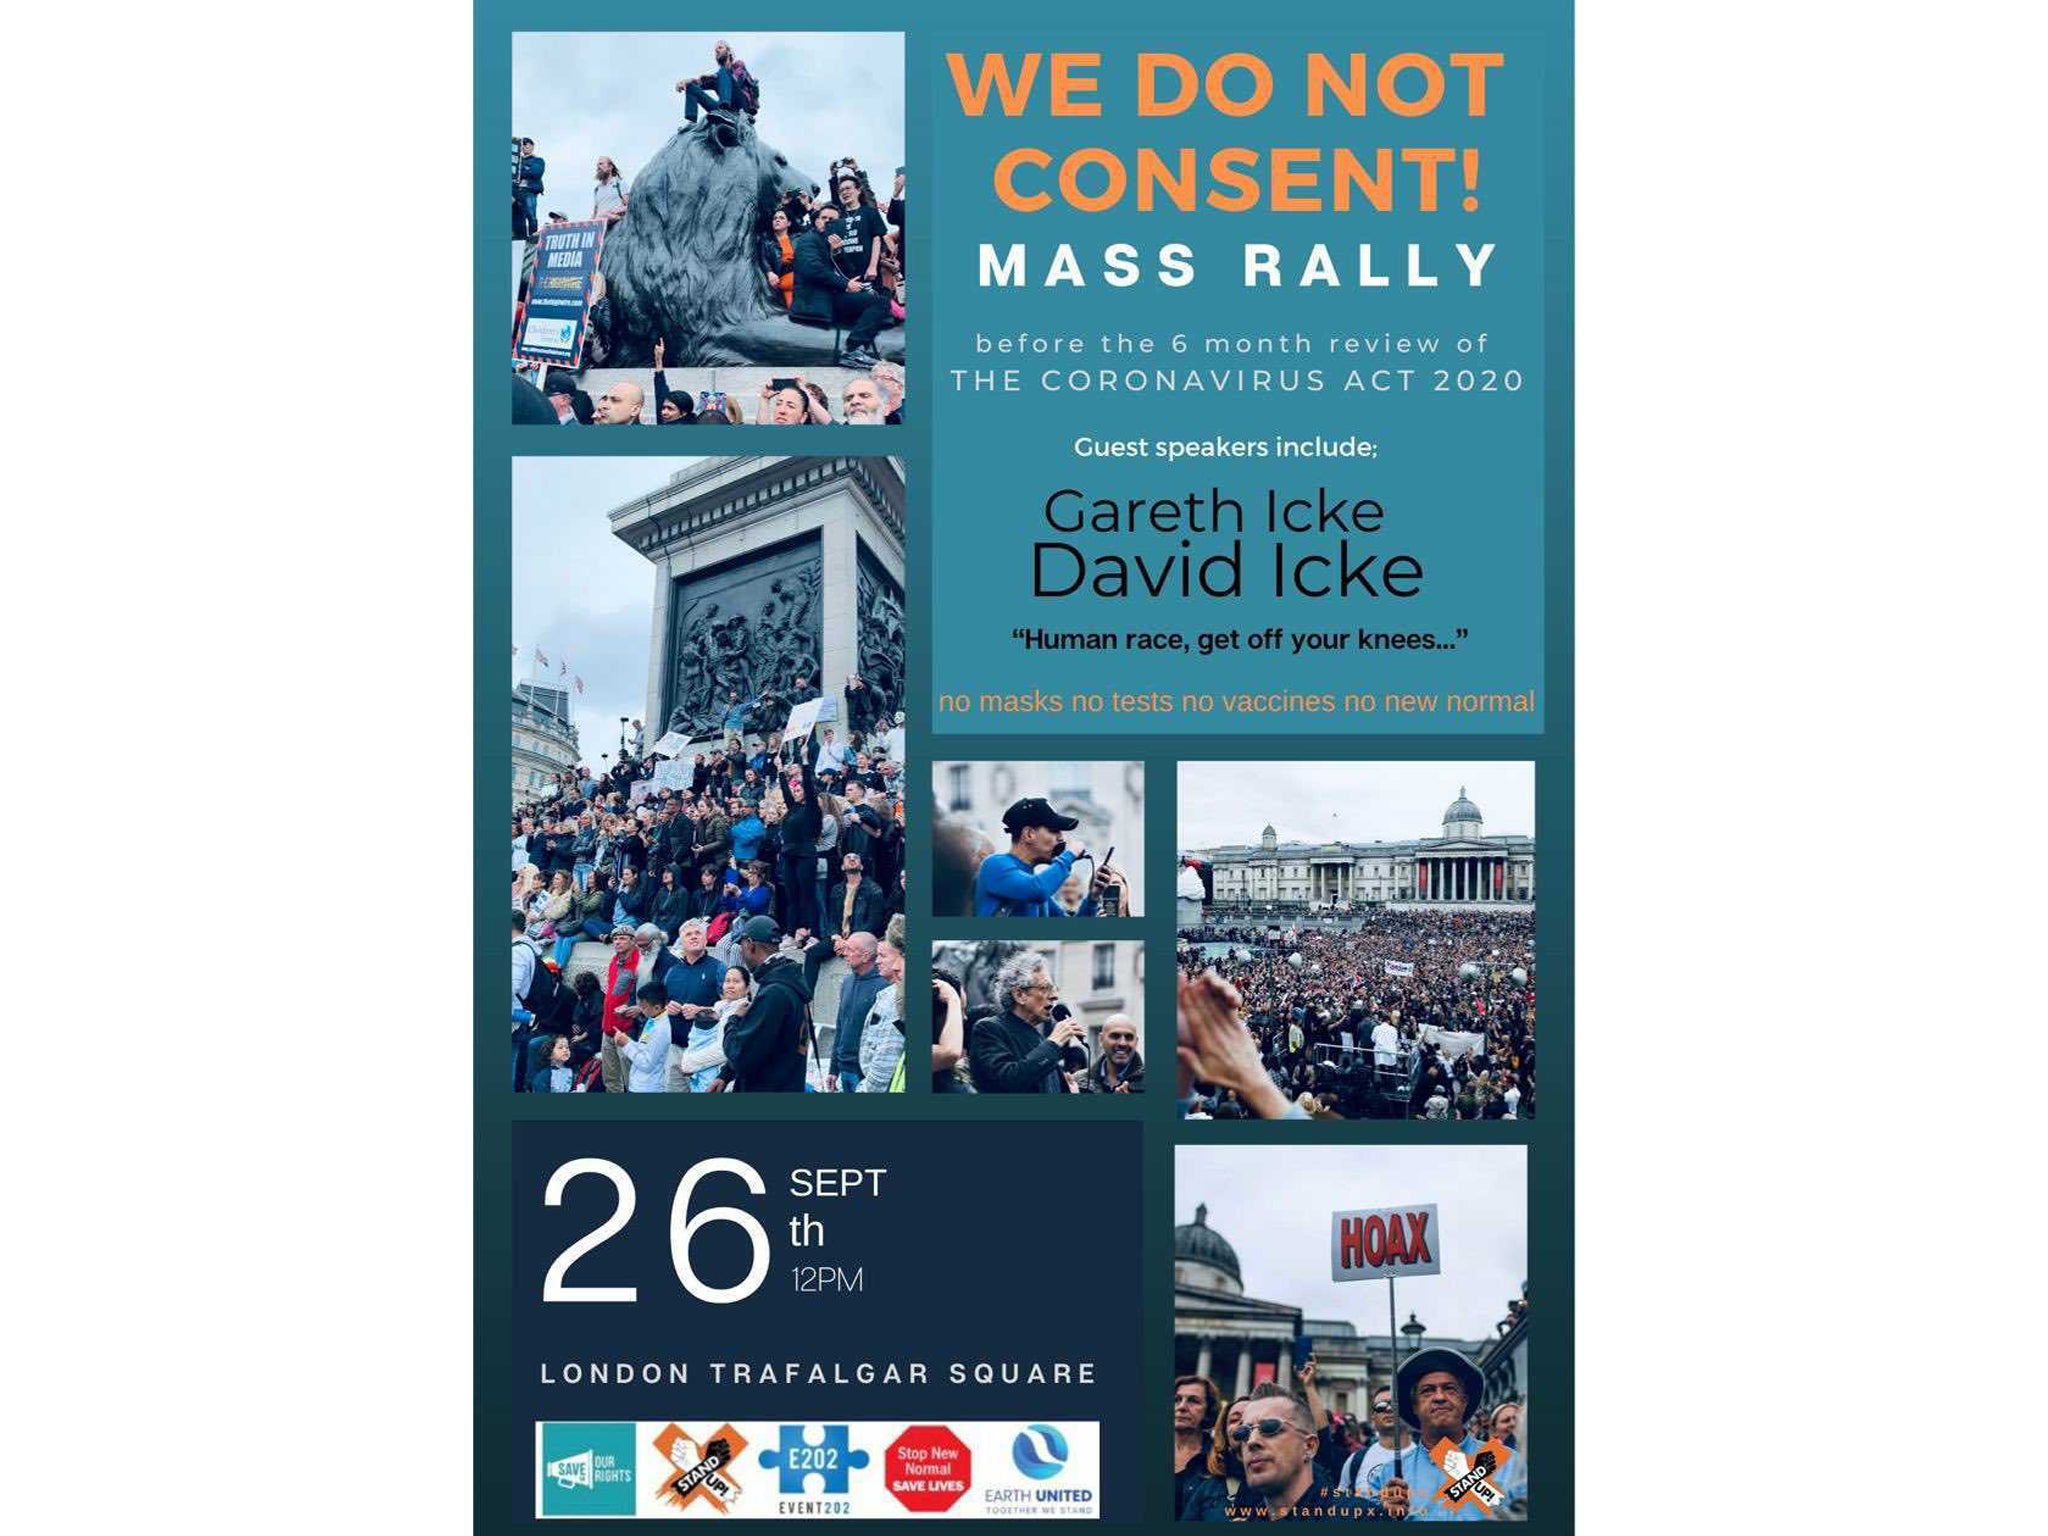 The poster bill for today's mass rally in Trafalgar Square by anti-lockdown protestors